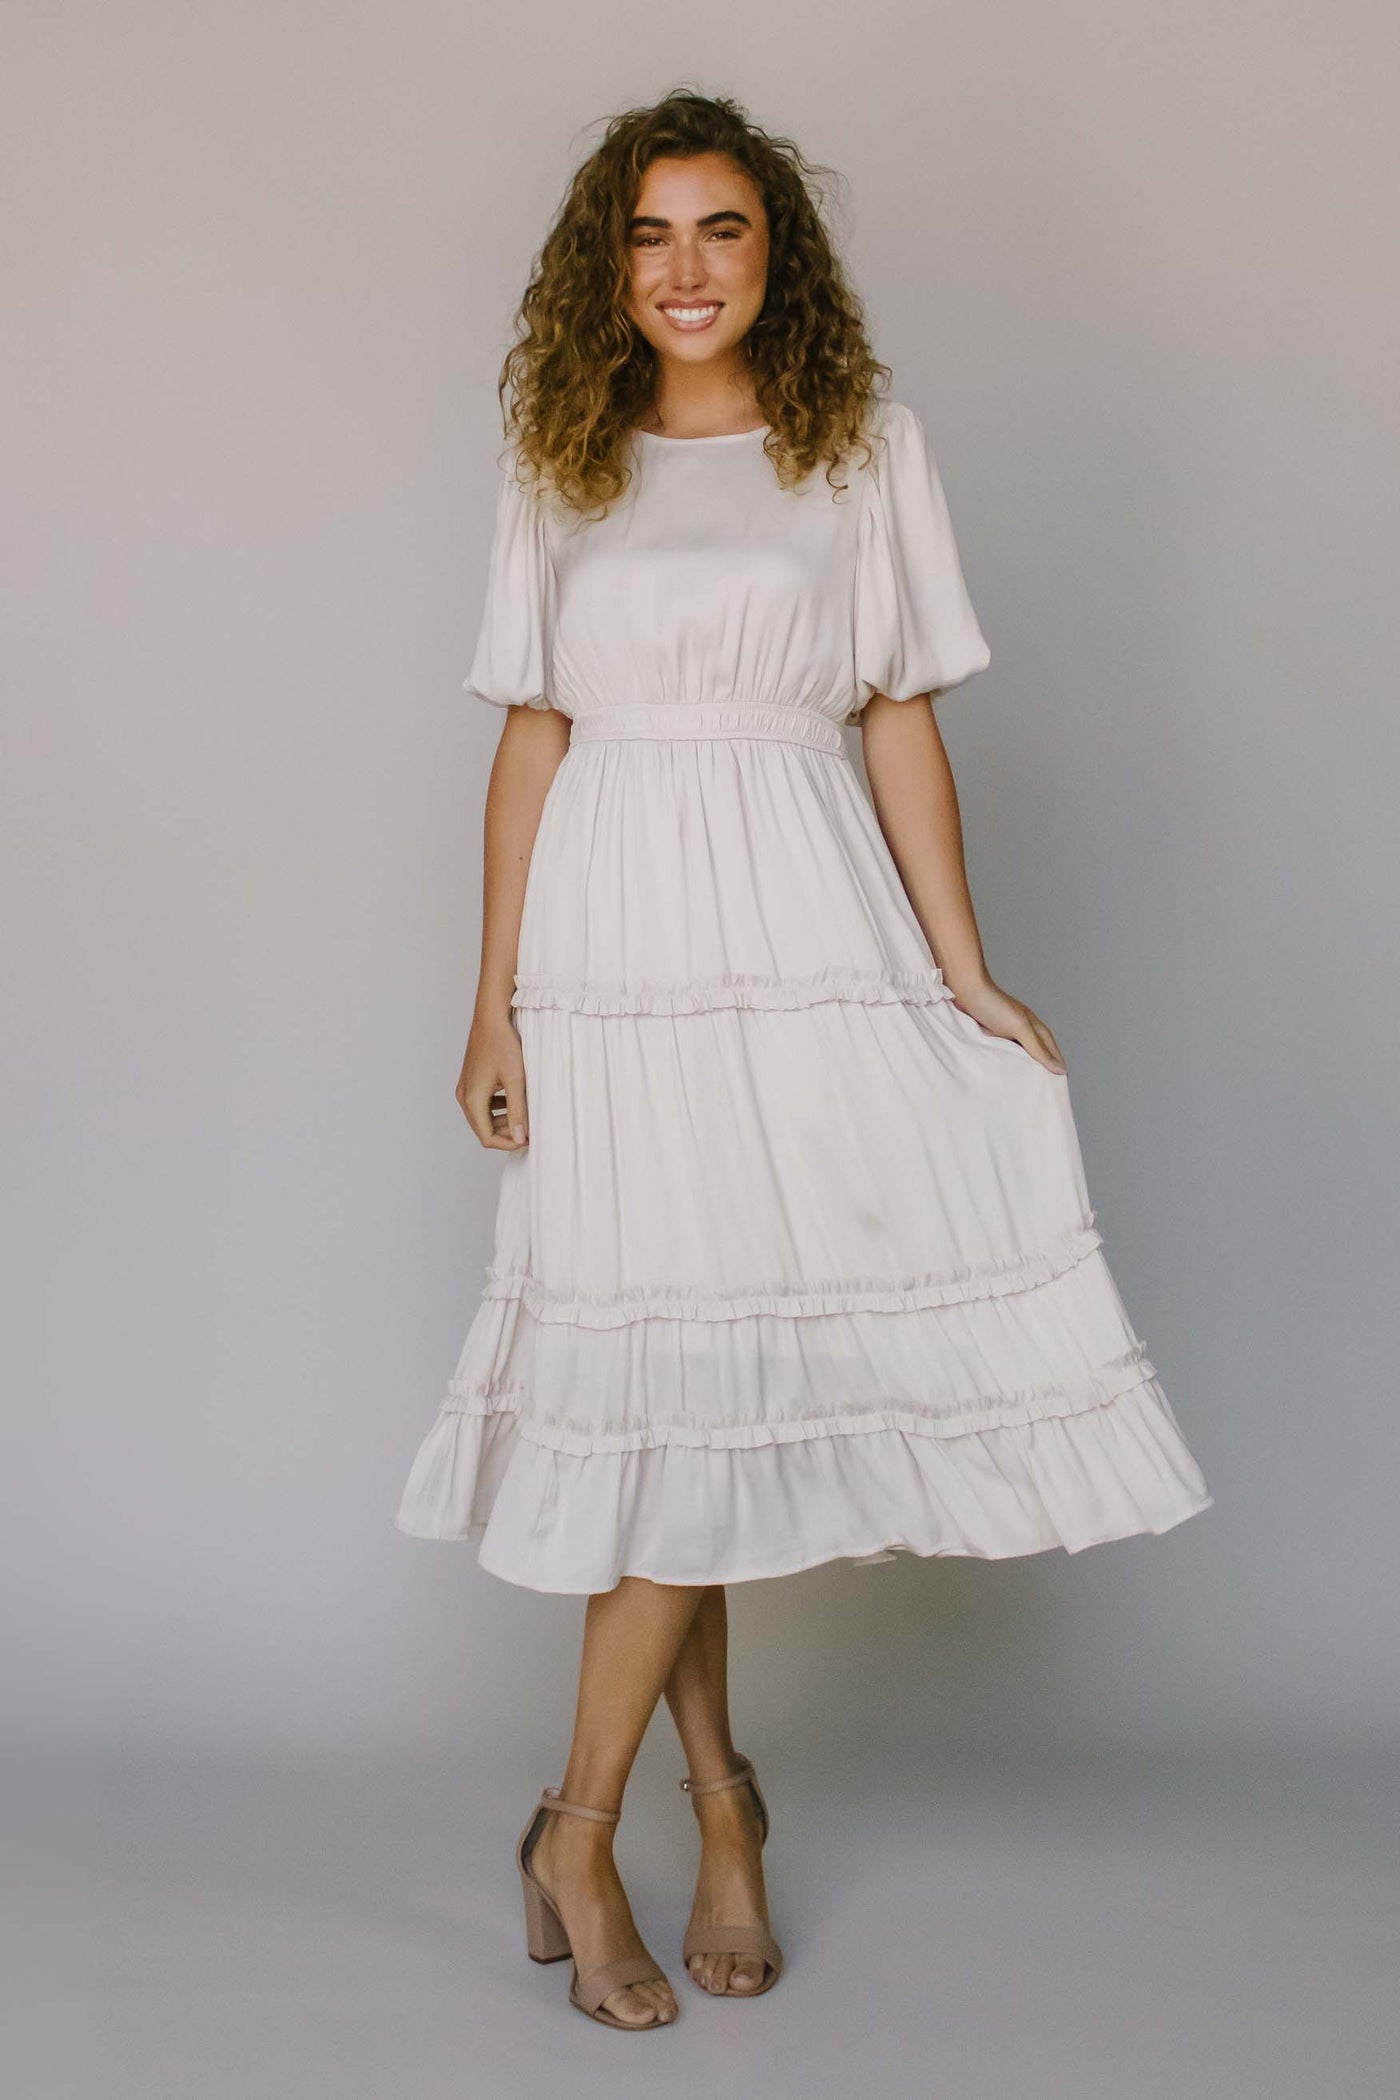 A modest dress in ivory with ruffled tiers, defined waist, puff sleeves, and a high neckline.